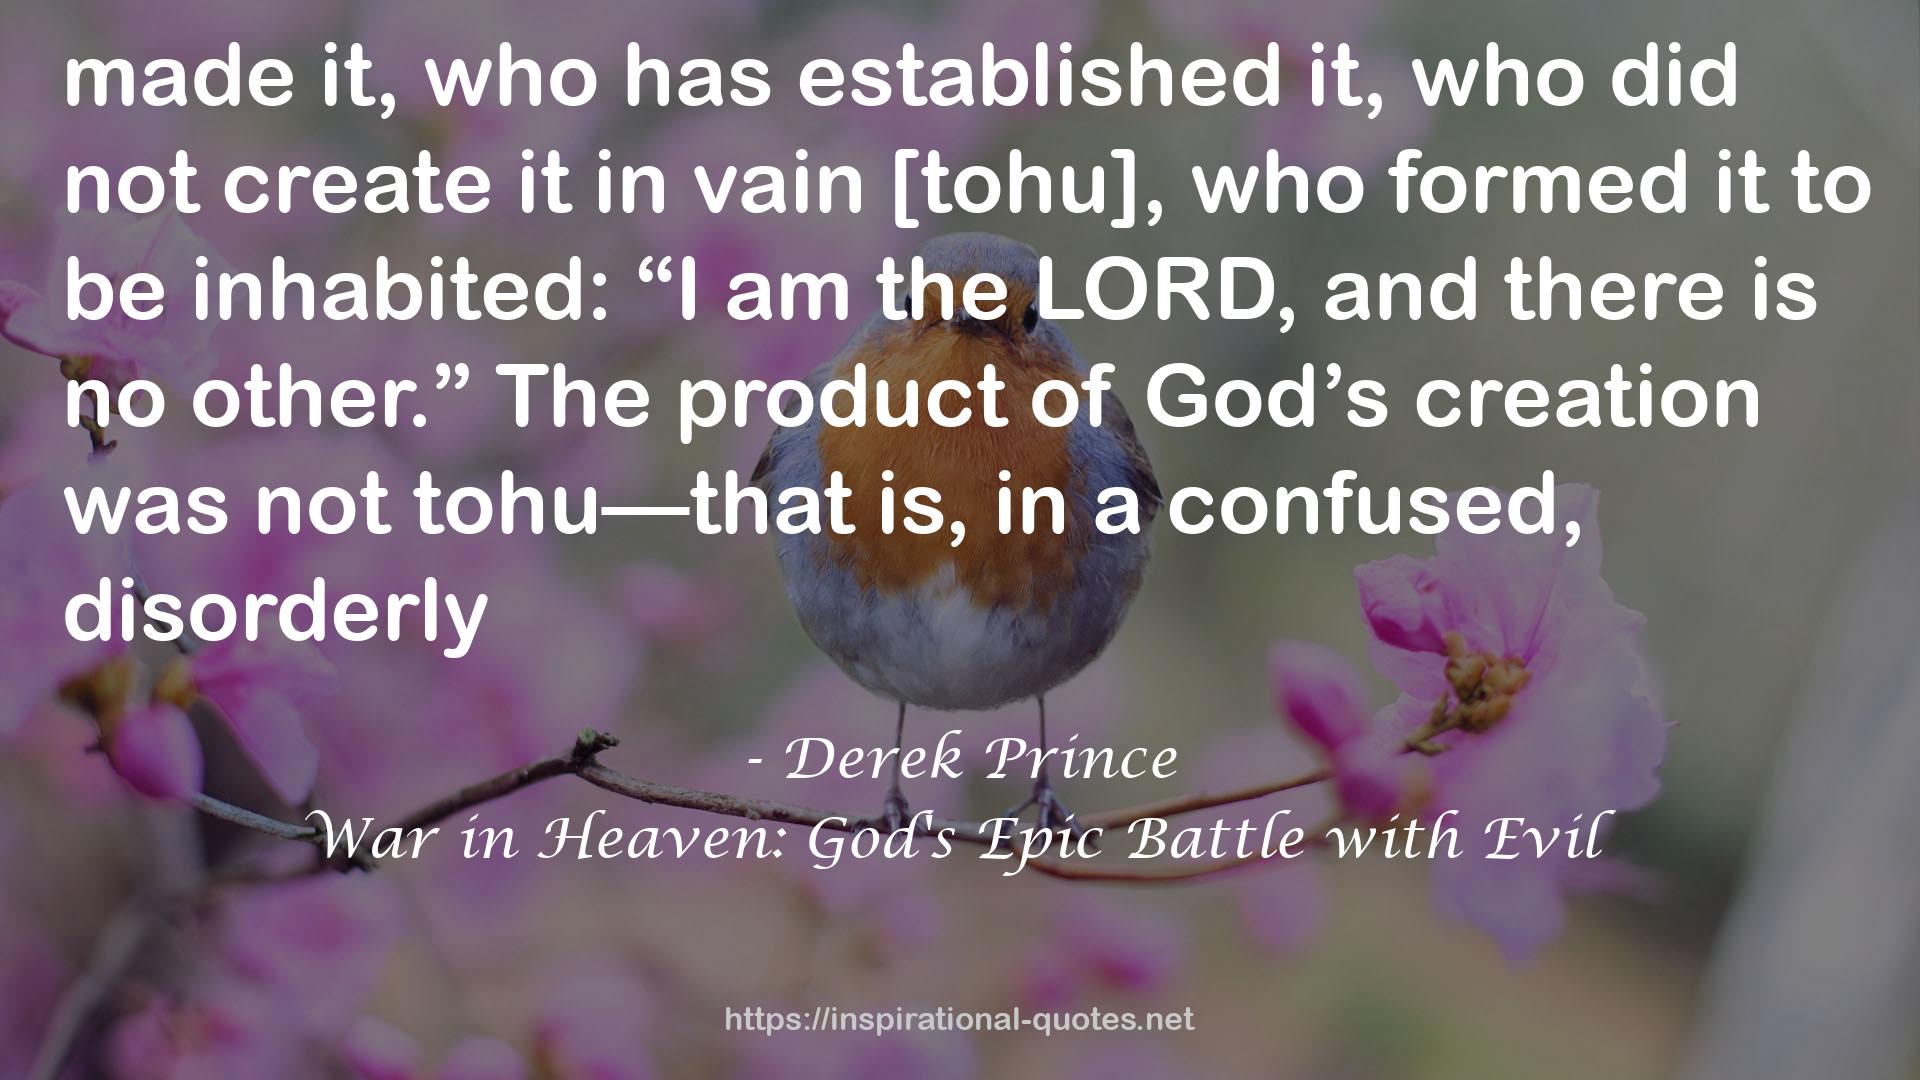 War in Heaven: God's Epic Battle with Evil QUOTES